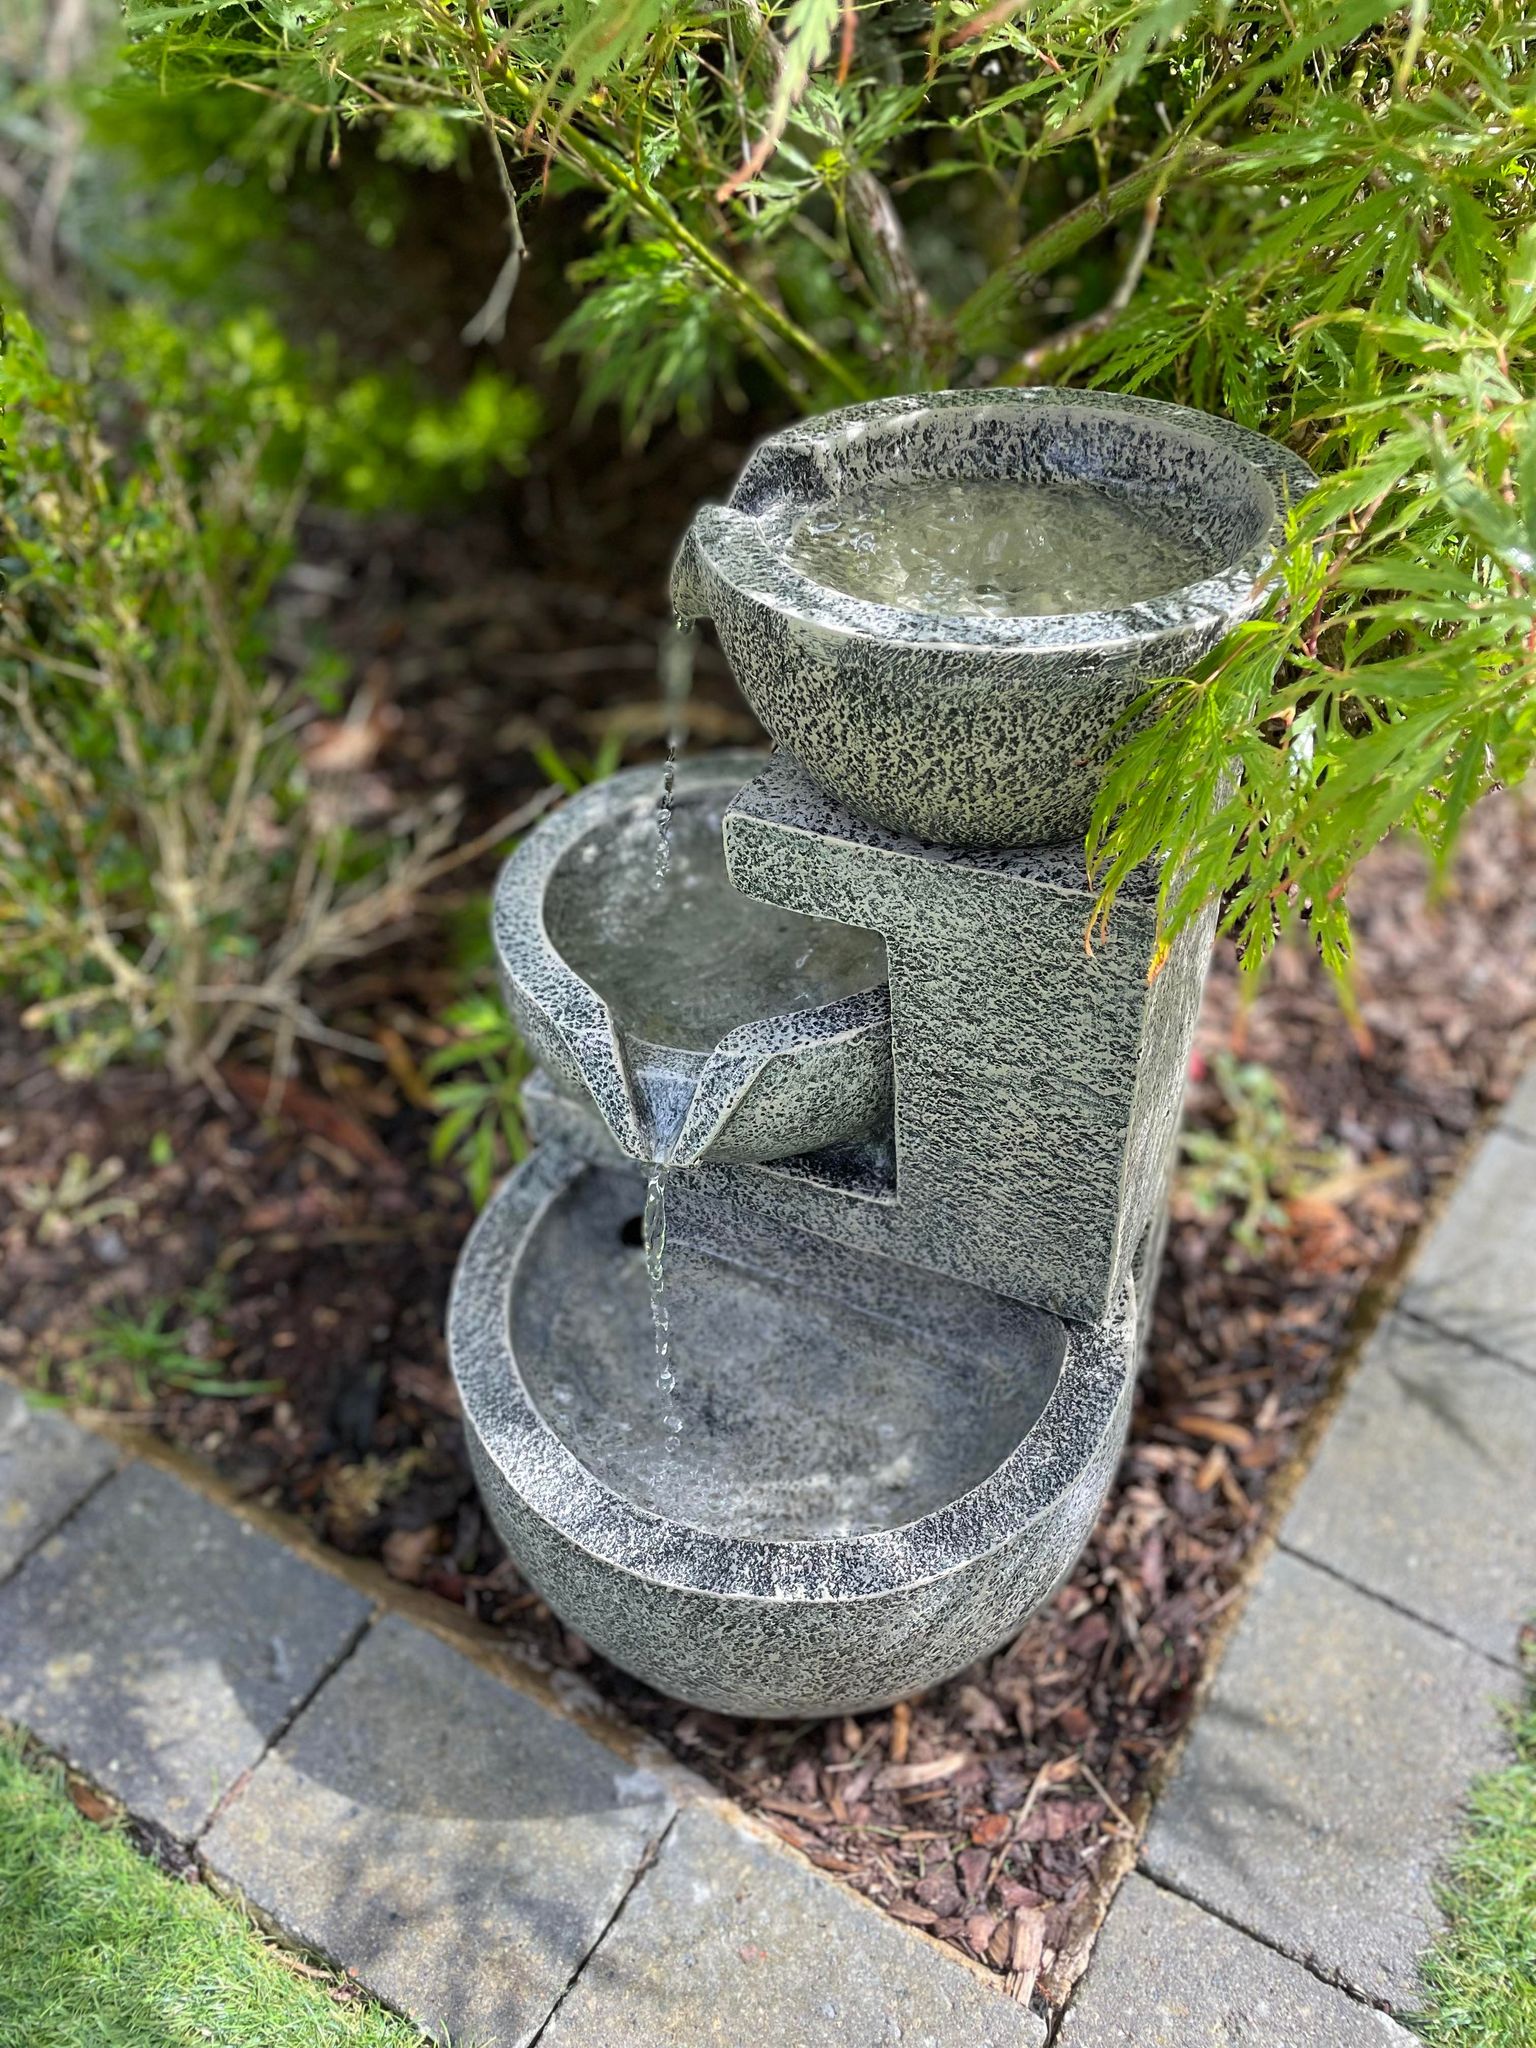  A step-by-step guide on how to clean your self-contained water feature